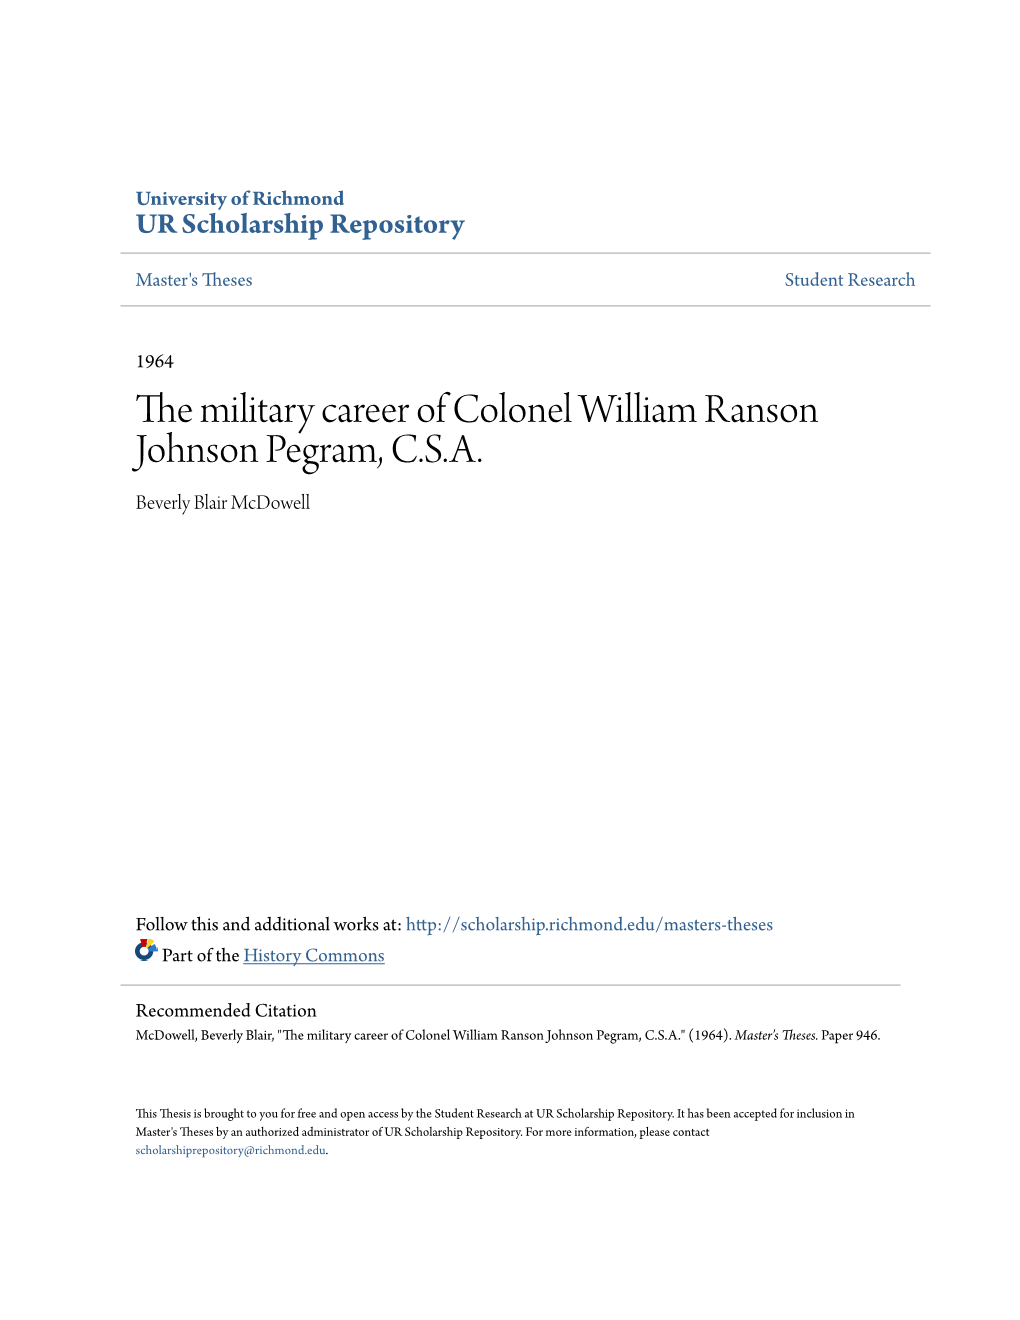 The Military Career of Colonel William Ranson Johnson Pegram, C.S.A. Beverly Blair Mcdowell